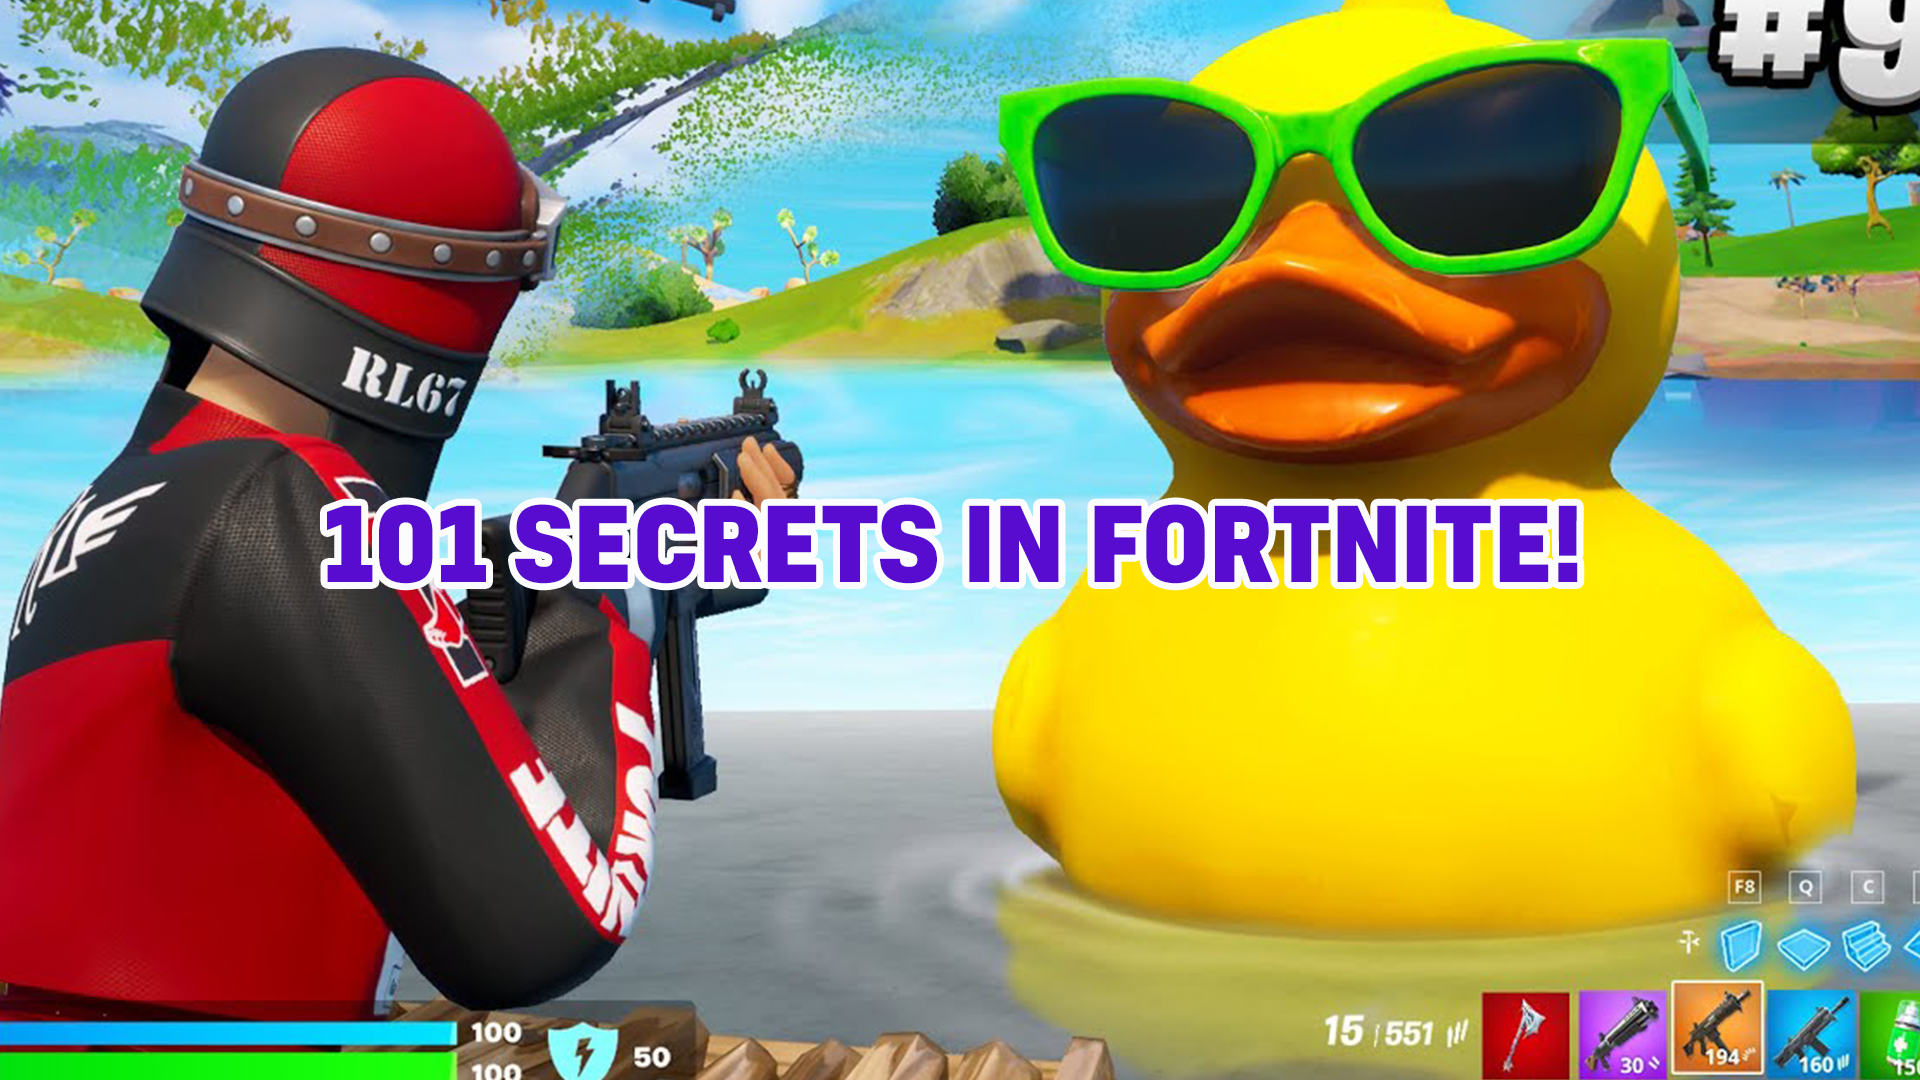 Everyone knows you haven't really played Fortnite until you've found every easter egg in the game! If you've yet to find them, this video will tell you exactly how!